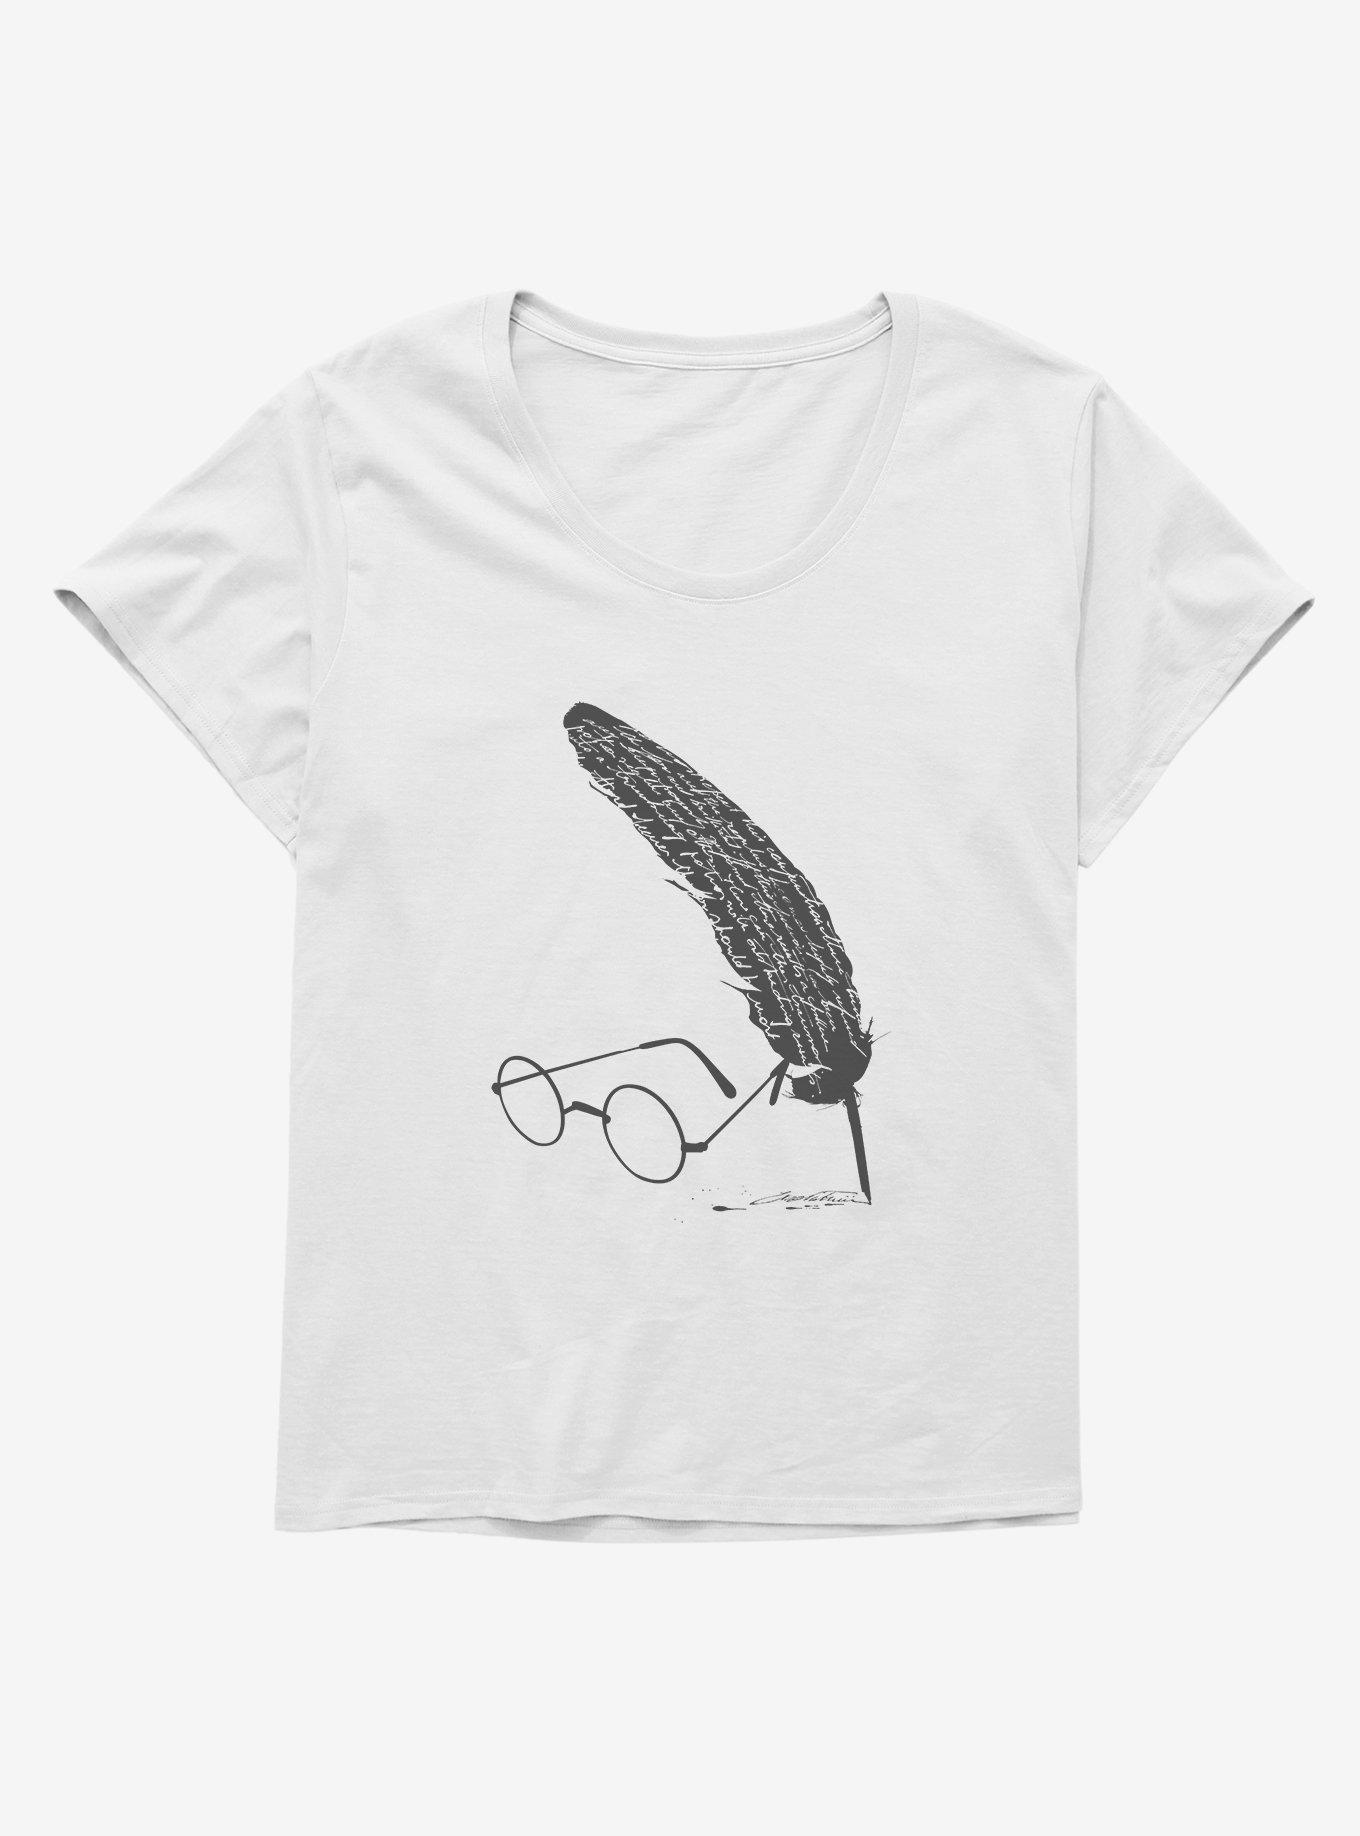 Harry Potter Glasses & Quill Girls T-Shirt Plus Size, , hi-res